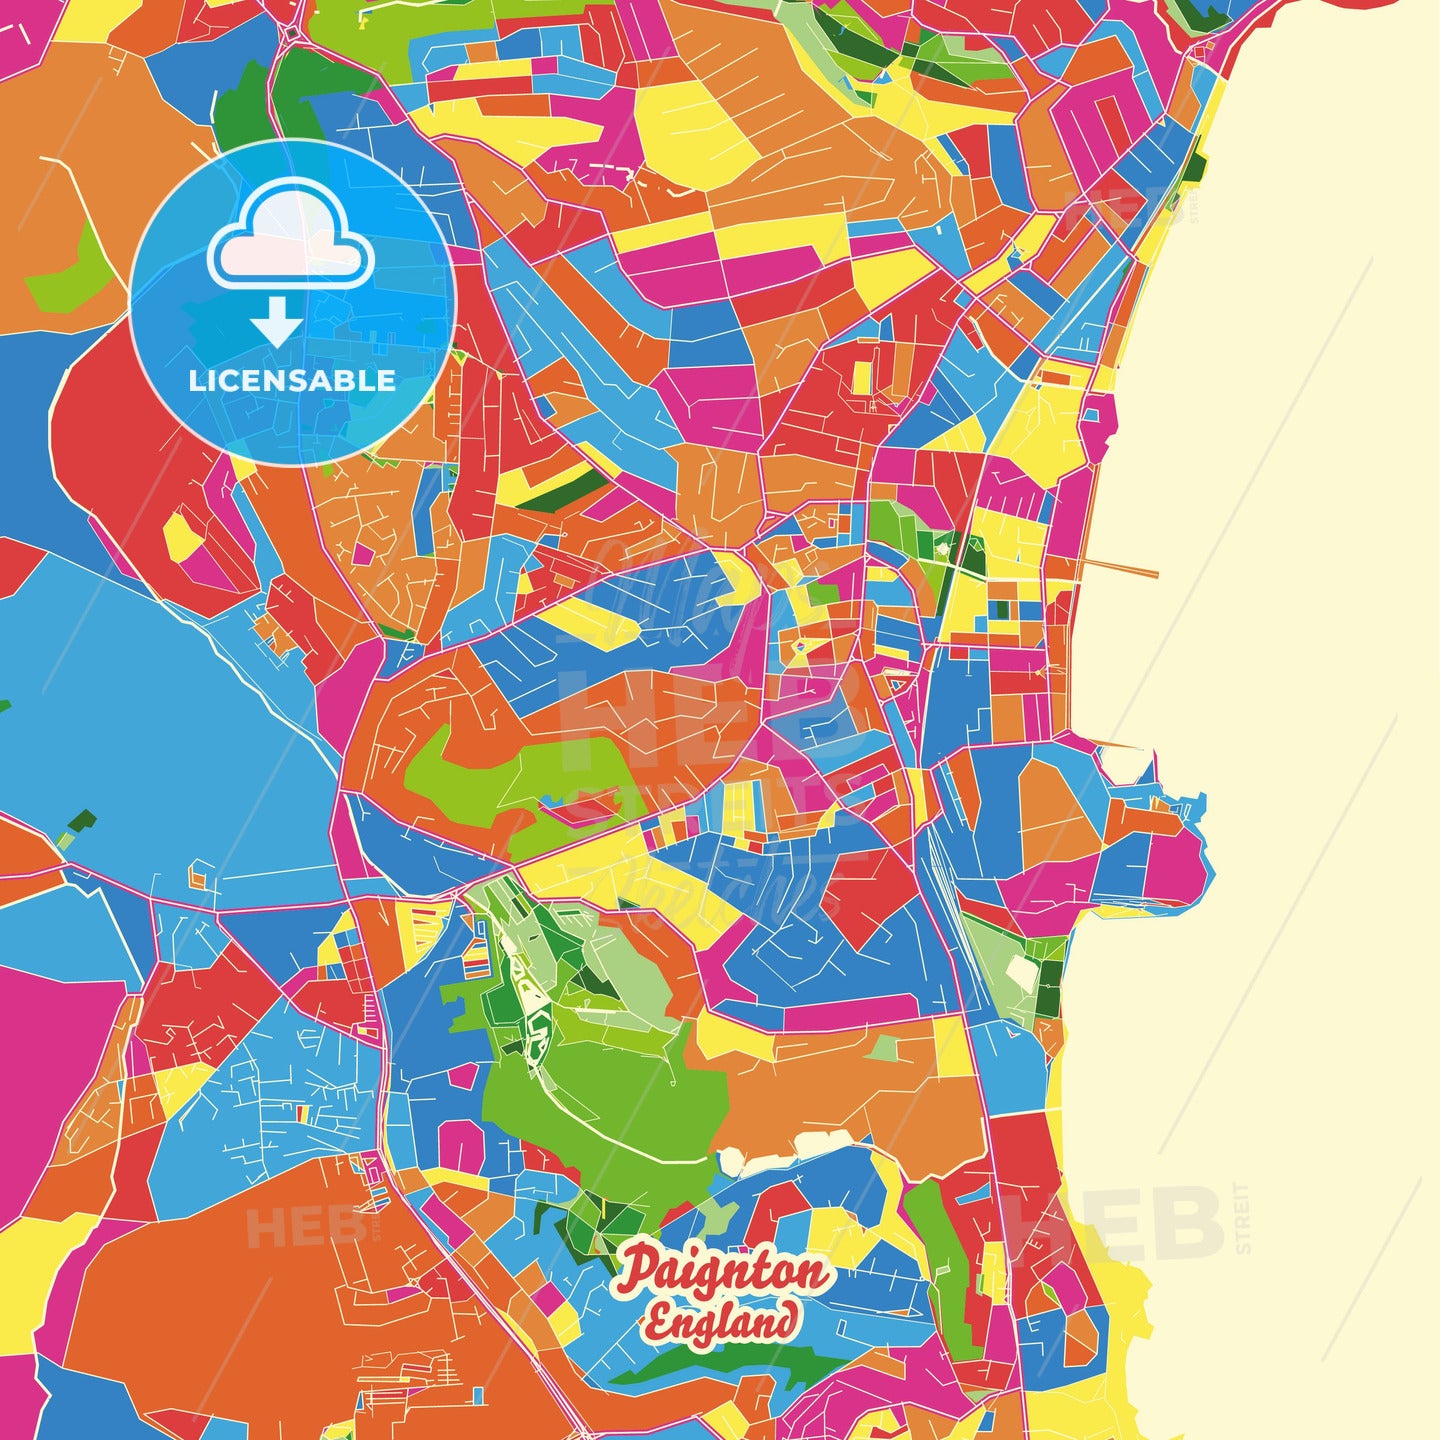 Paignton, England Crazy Colorful Street Map Poster Template - HEBSTREITS Sketches